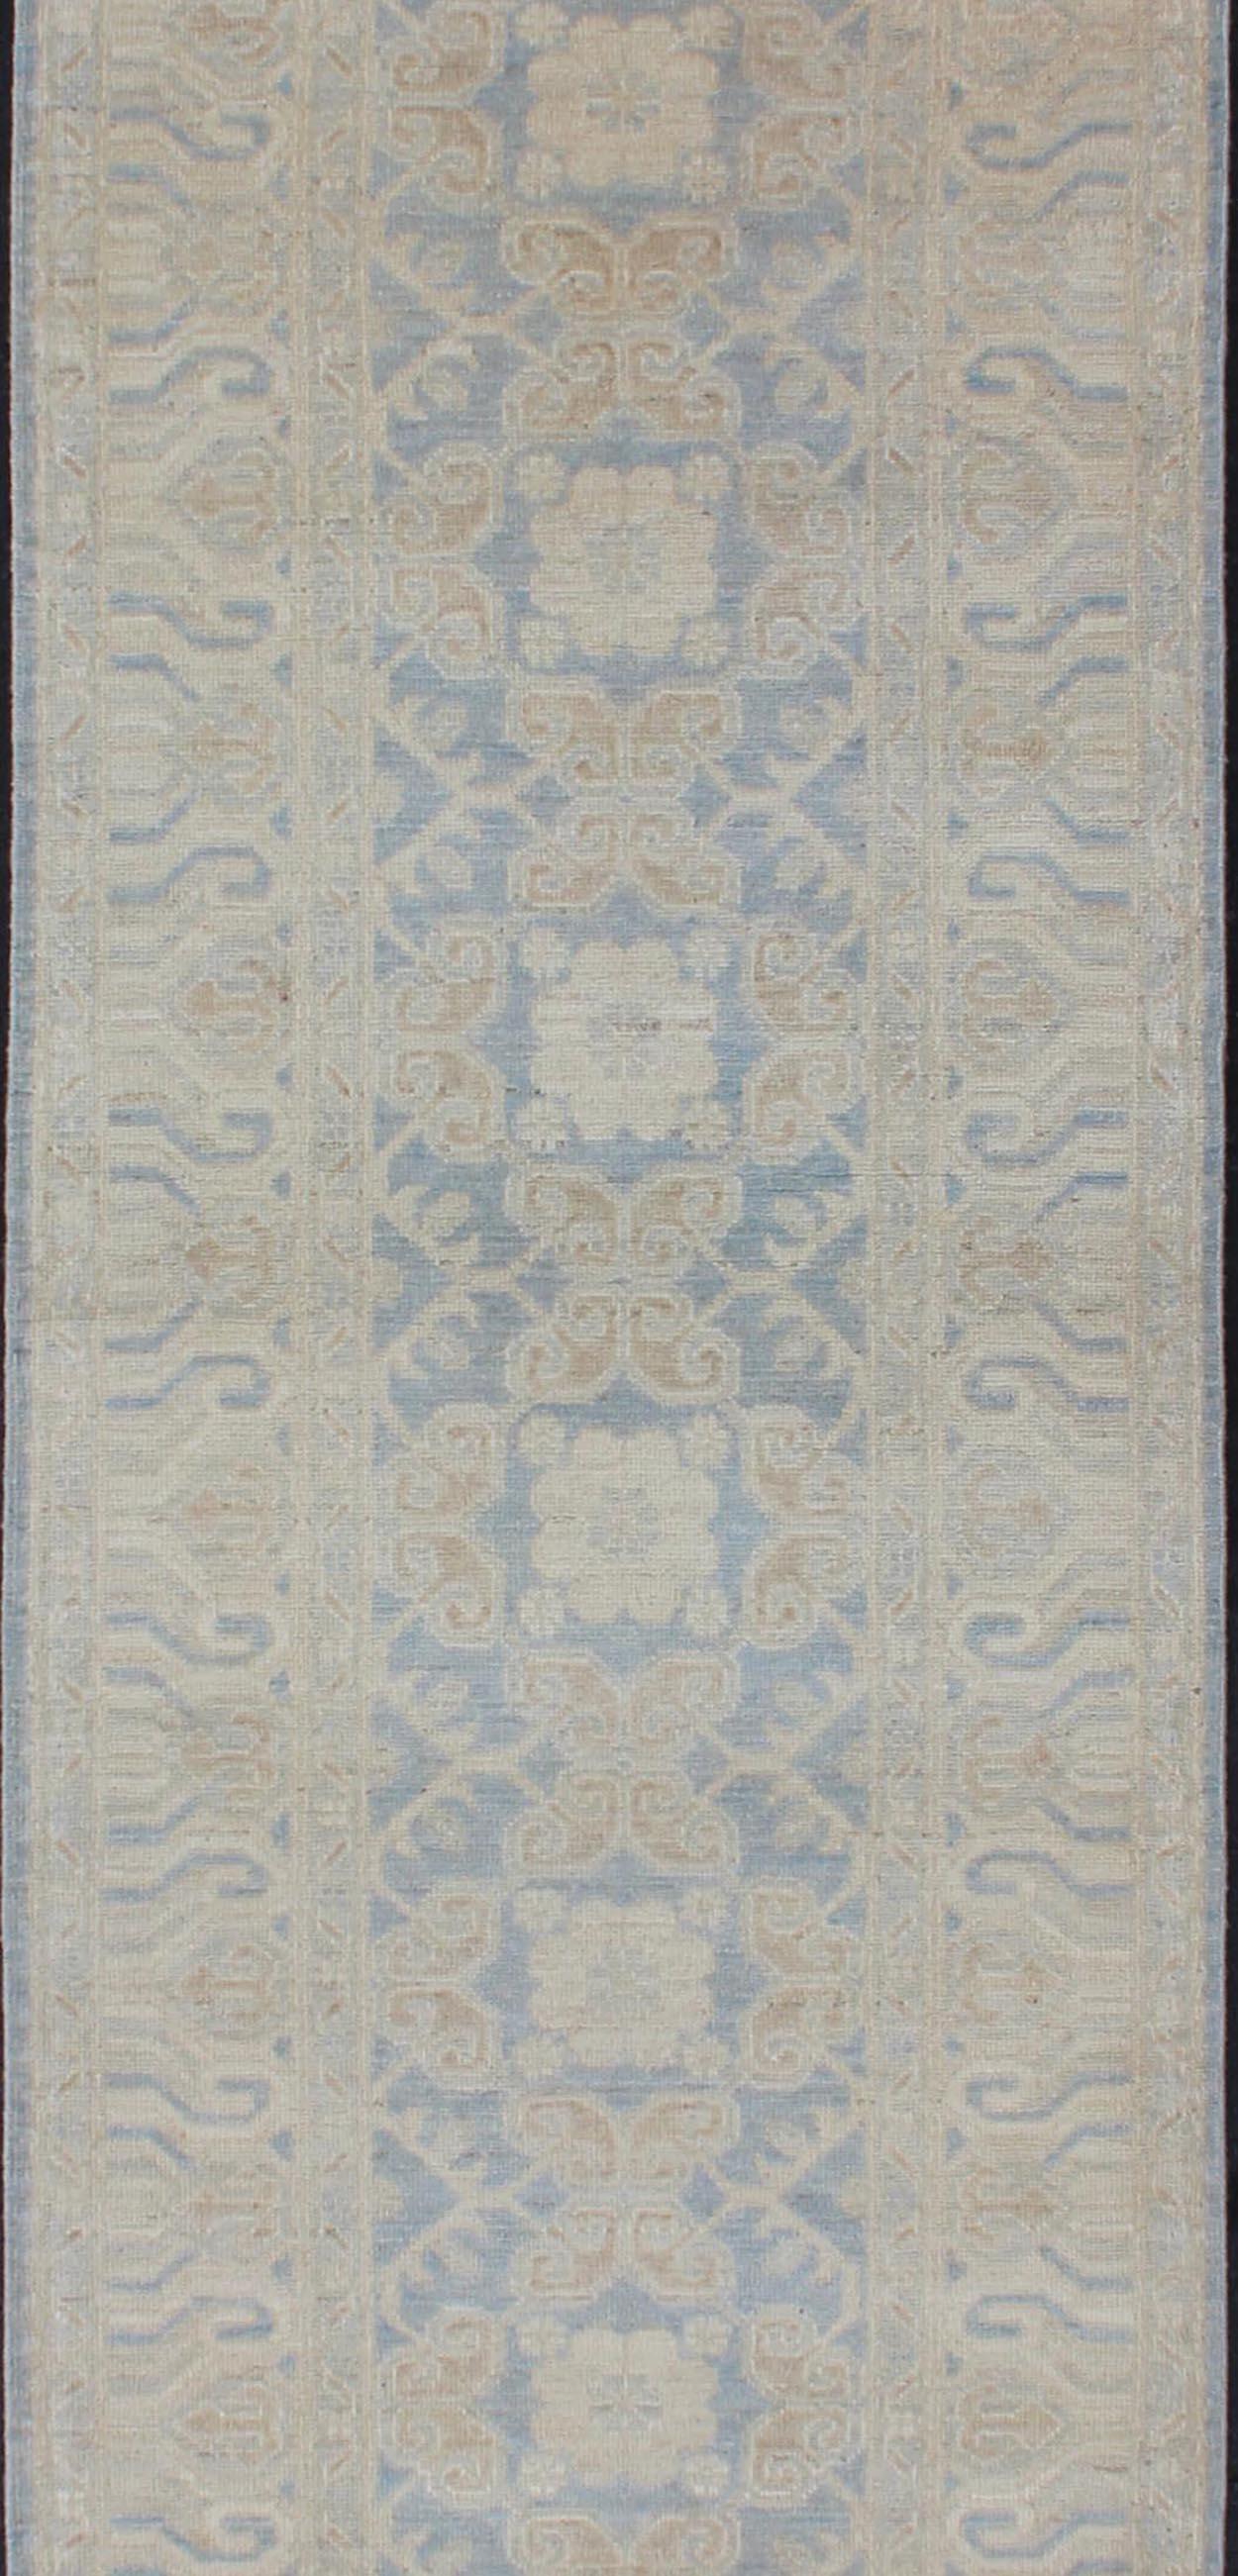 Afghan Khotan Runner with Geometric Design in Shades of Powder Blue and Tan In New Condition For Sale In Atlanta, GA